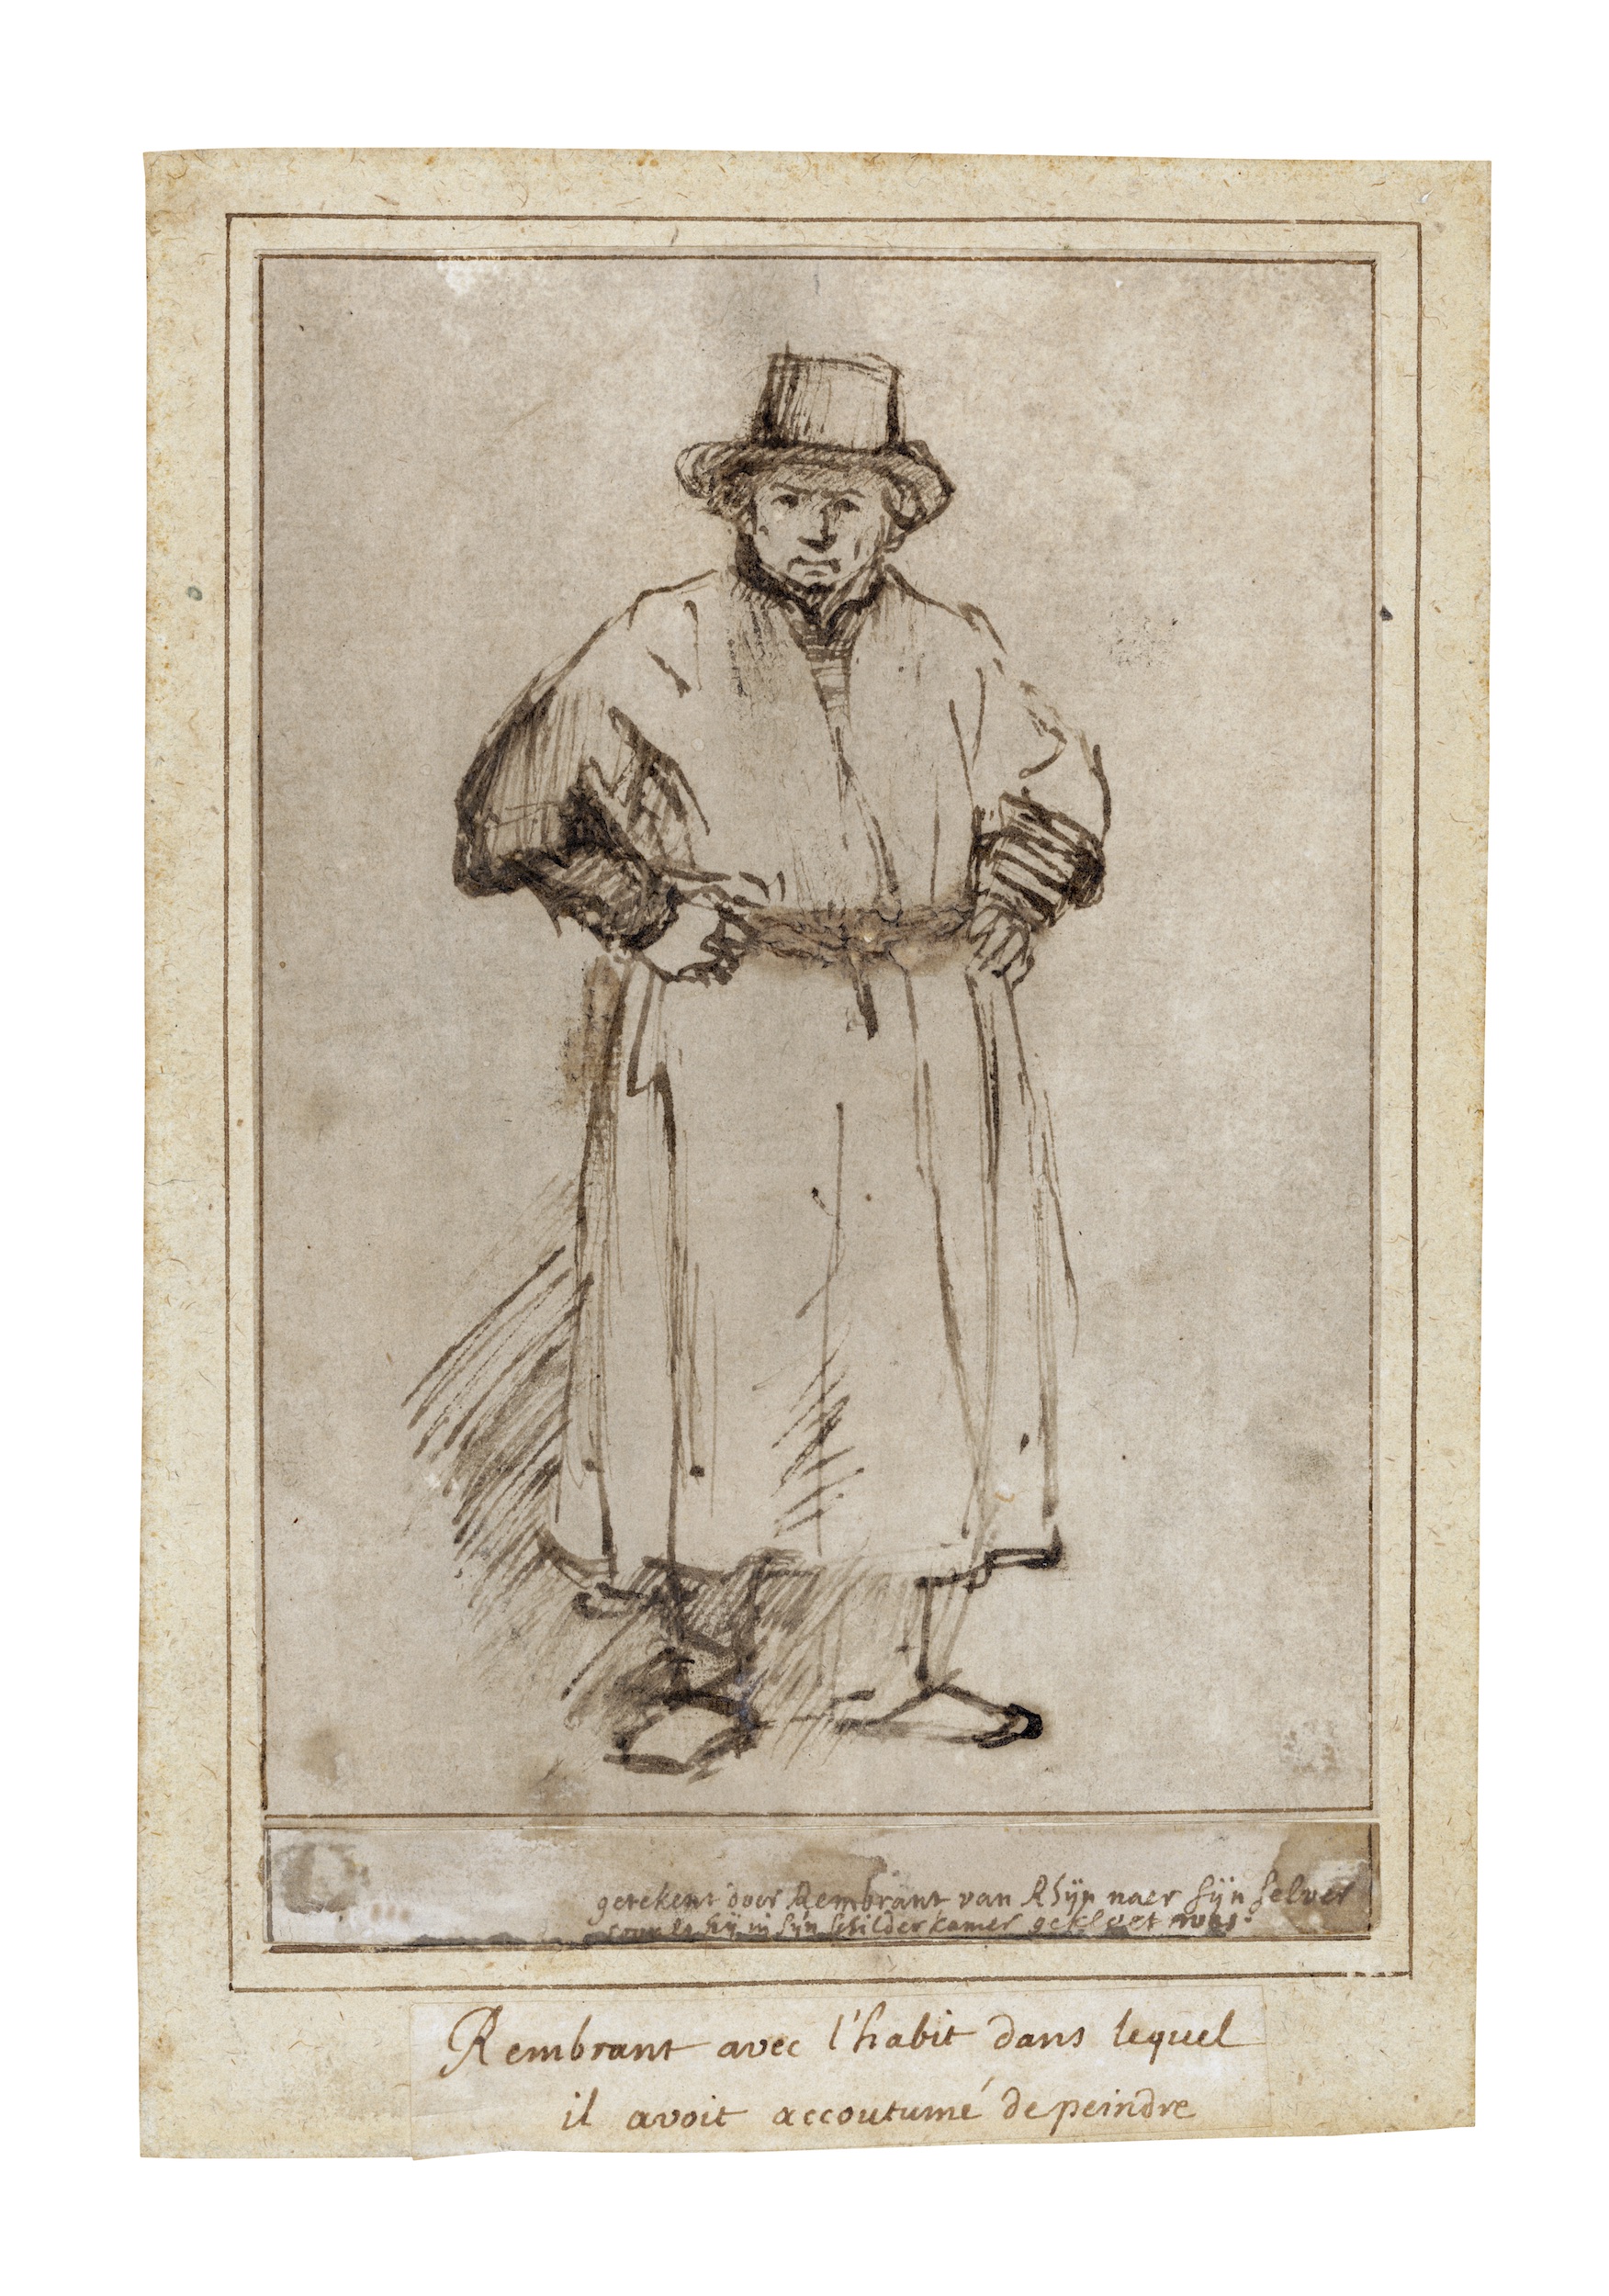 Rembrandt by Willem Drost - ca. 1650 - 203 x 134 mm. Rembrandthuis